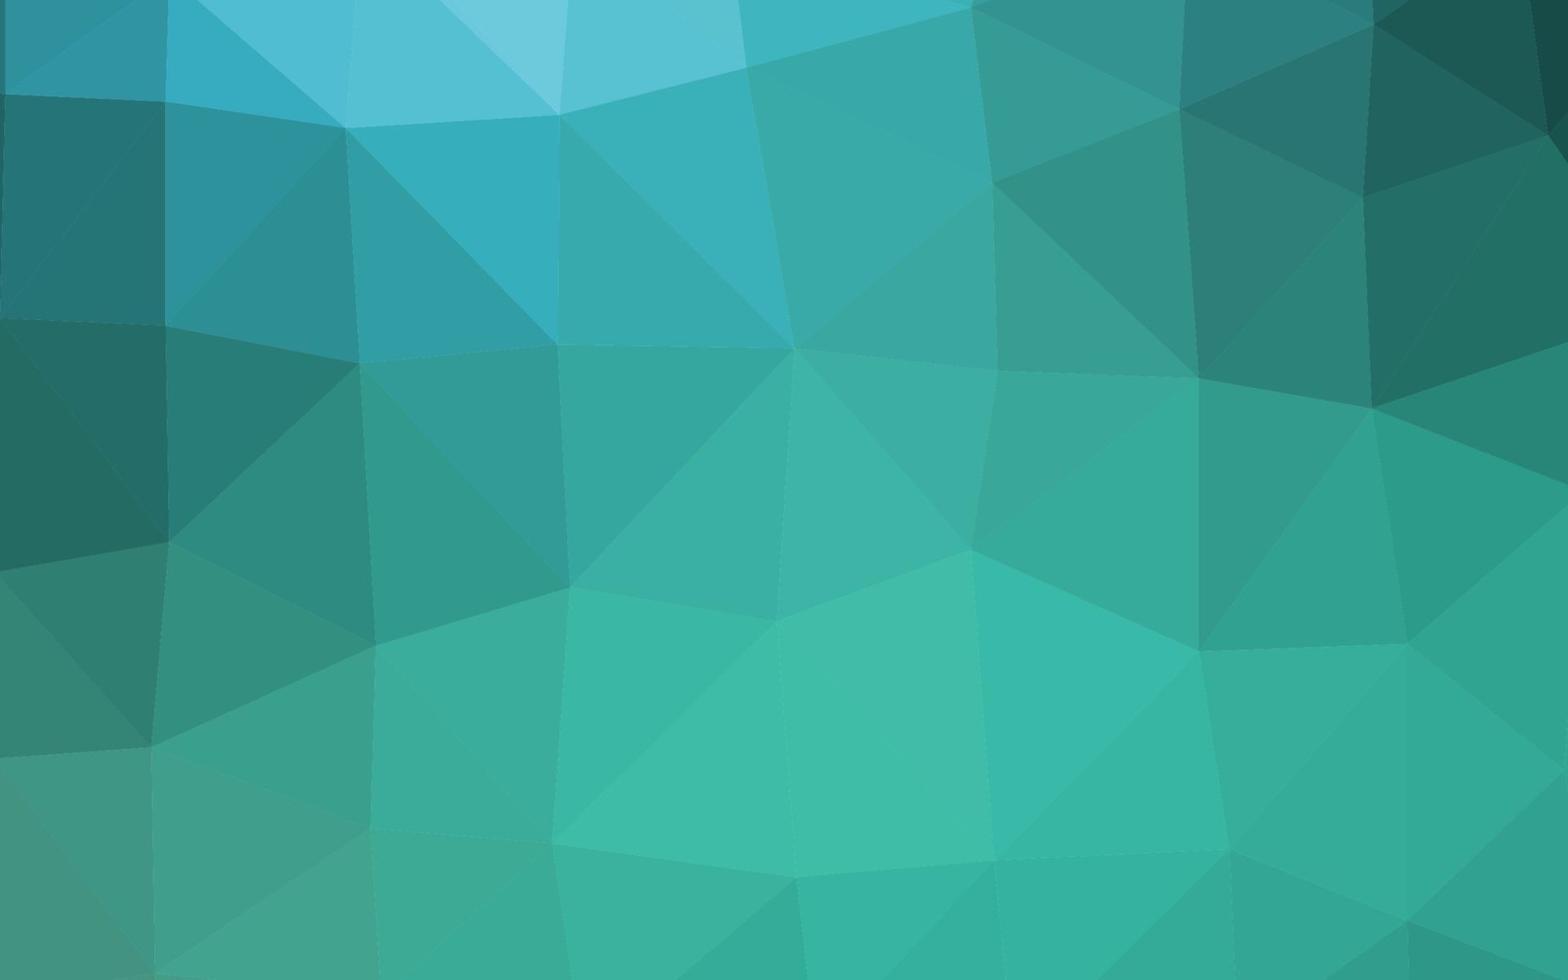 Light BLUE vector triangle mosaic cover.